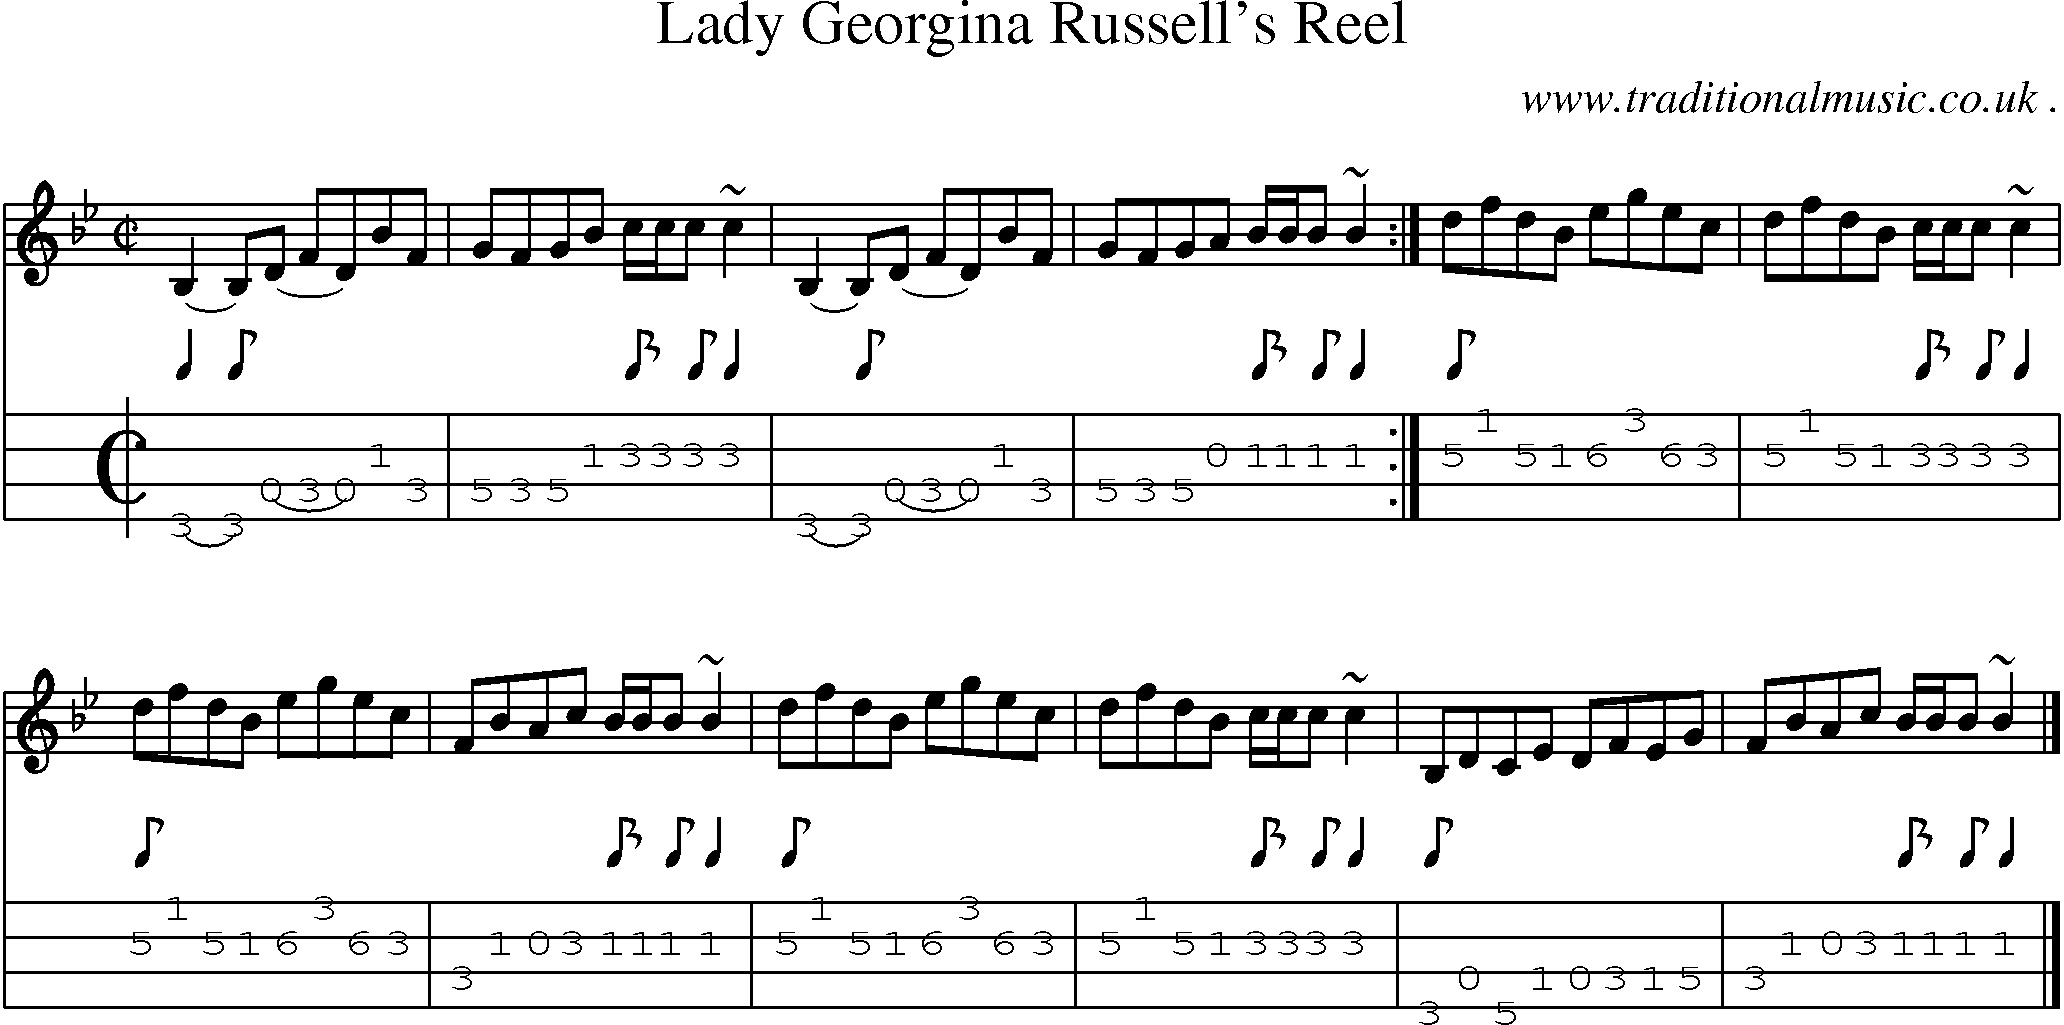 Sheet-music  score, Chords and Mandolin Tabs for Lady Georgina Russells Reel